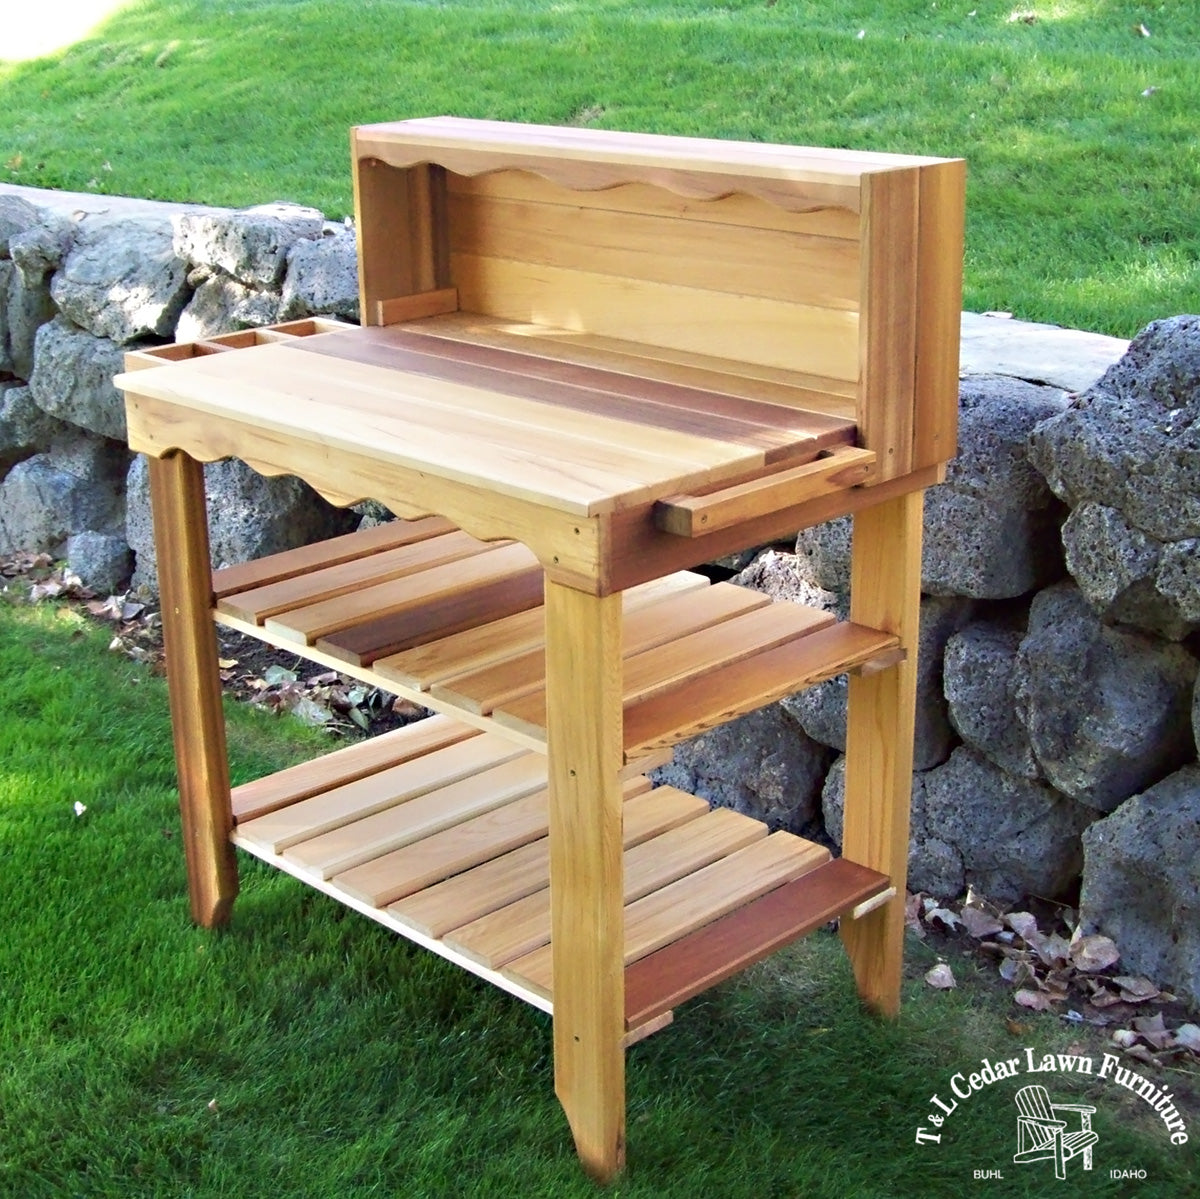 T&L Deluxe Potting Bench